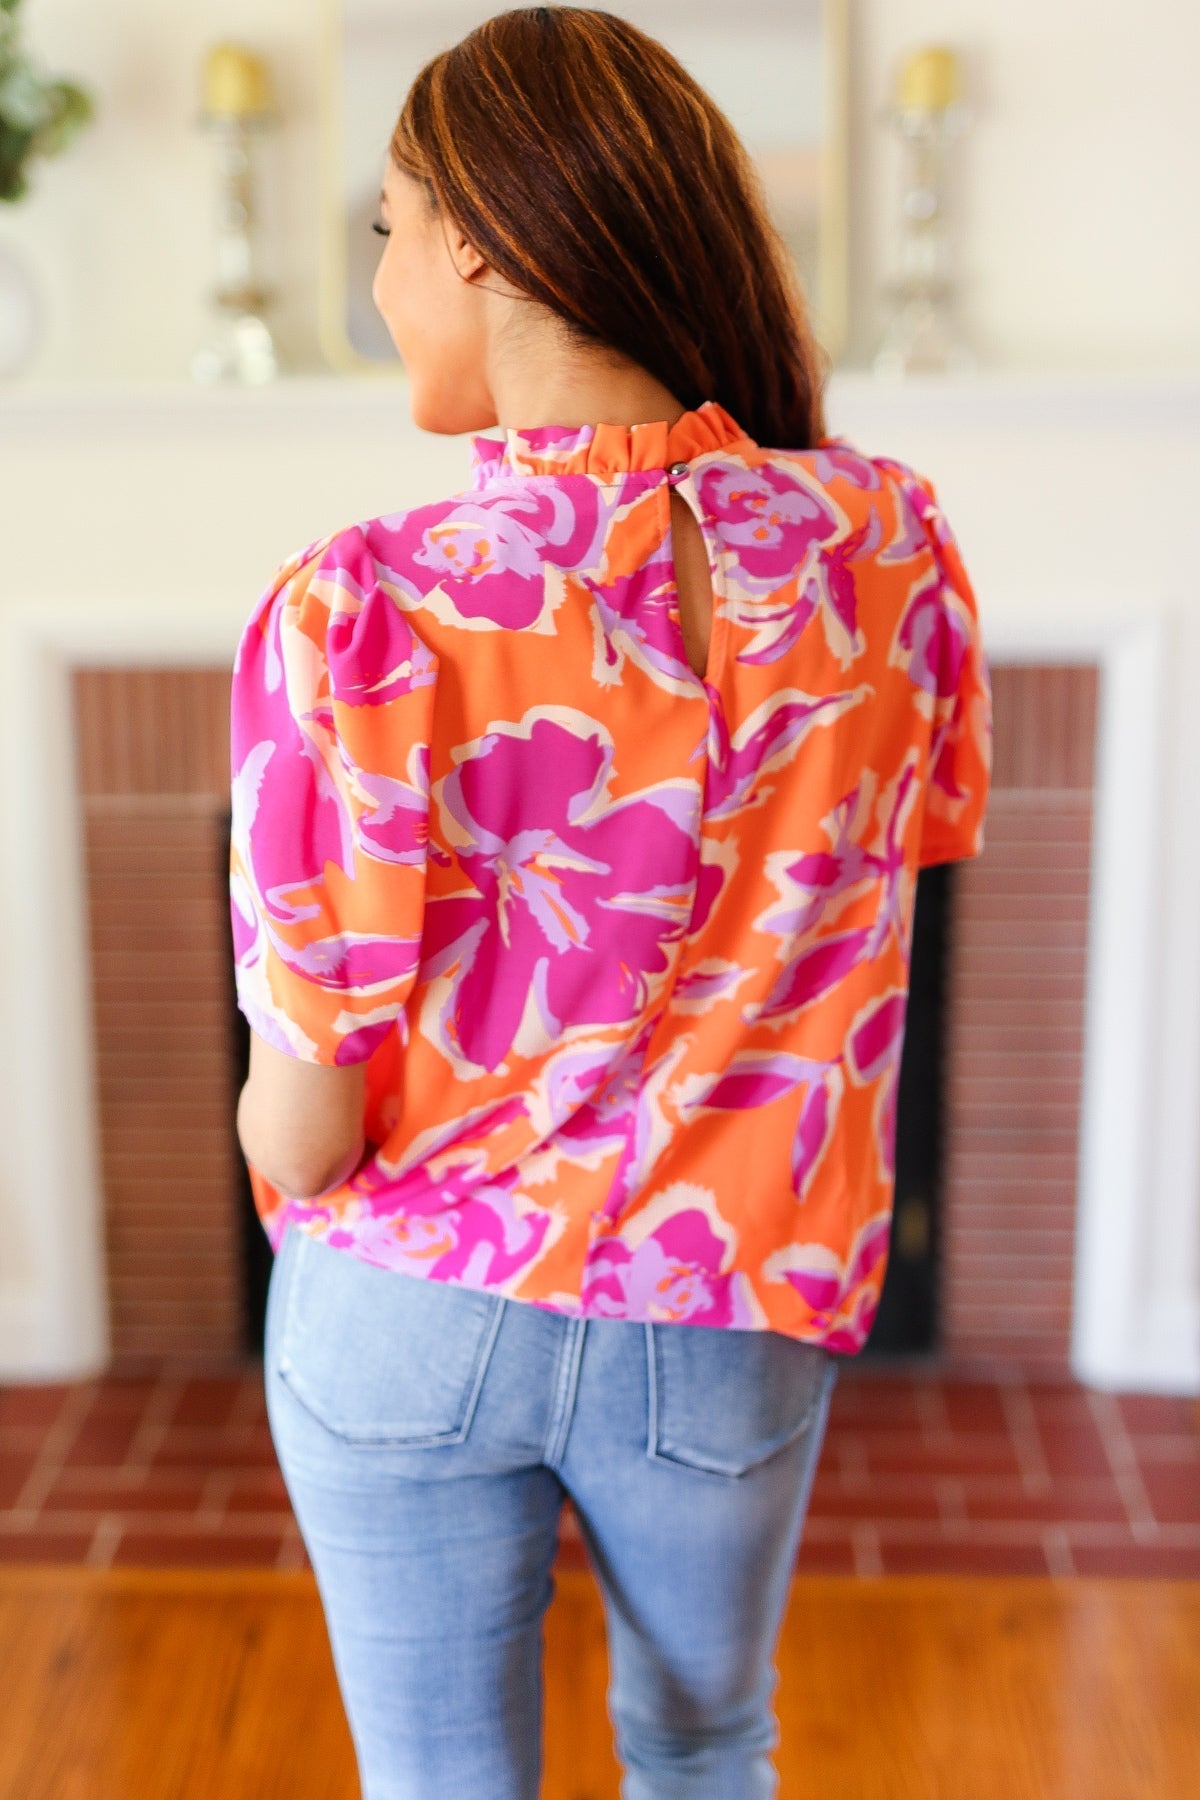 Feel Your Best Fuchsia Orange Floral Print Frill Mock Neck Top (Shipping in 1-2 Weeks)